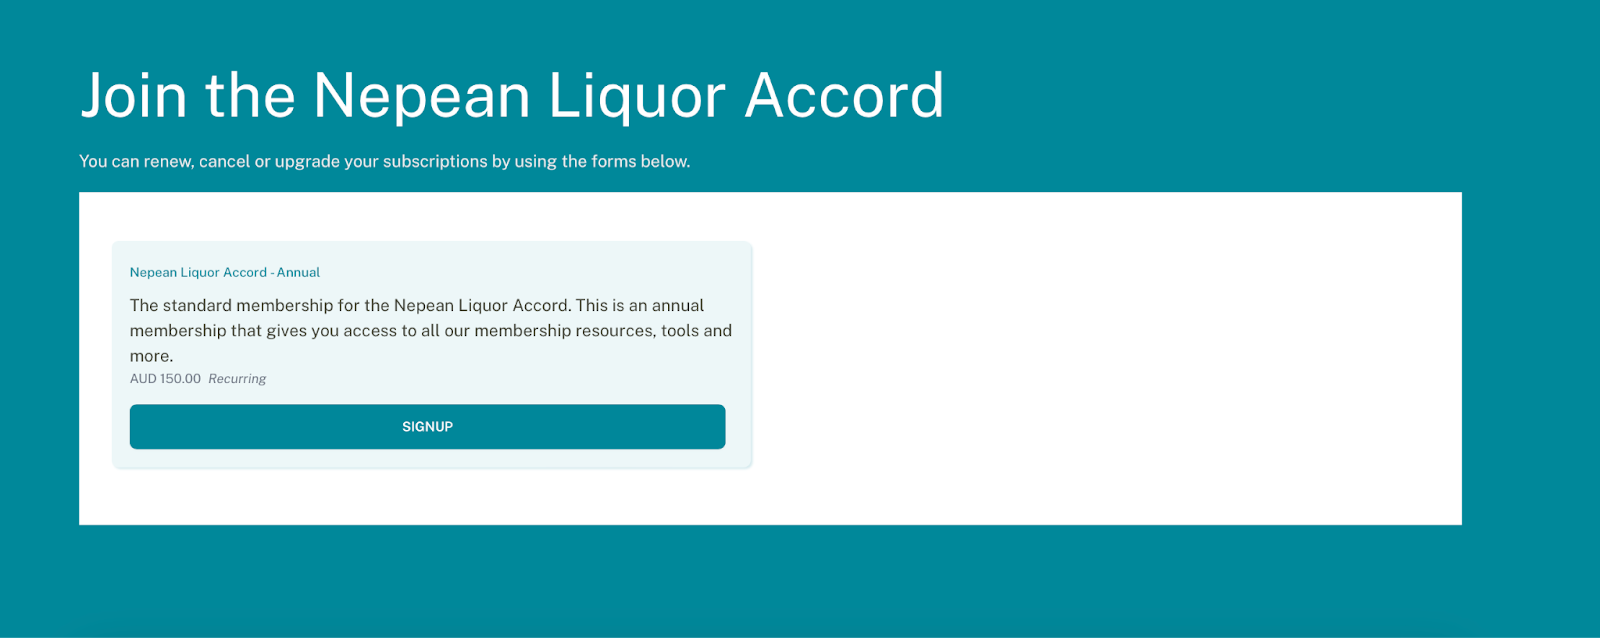 join the nepean liquor accord signup screen 